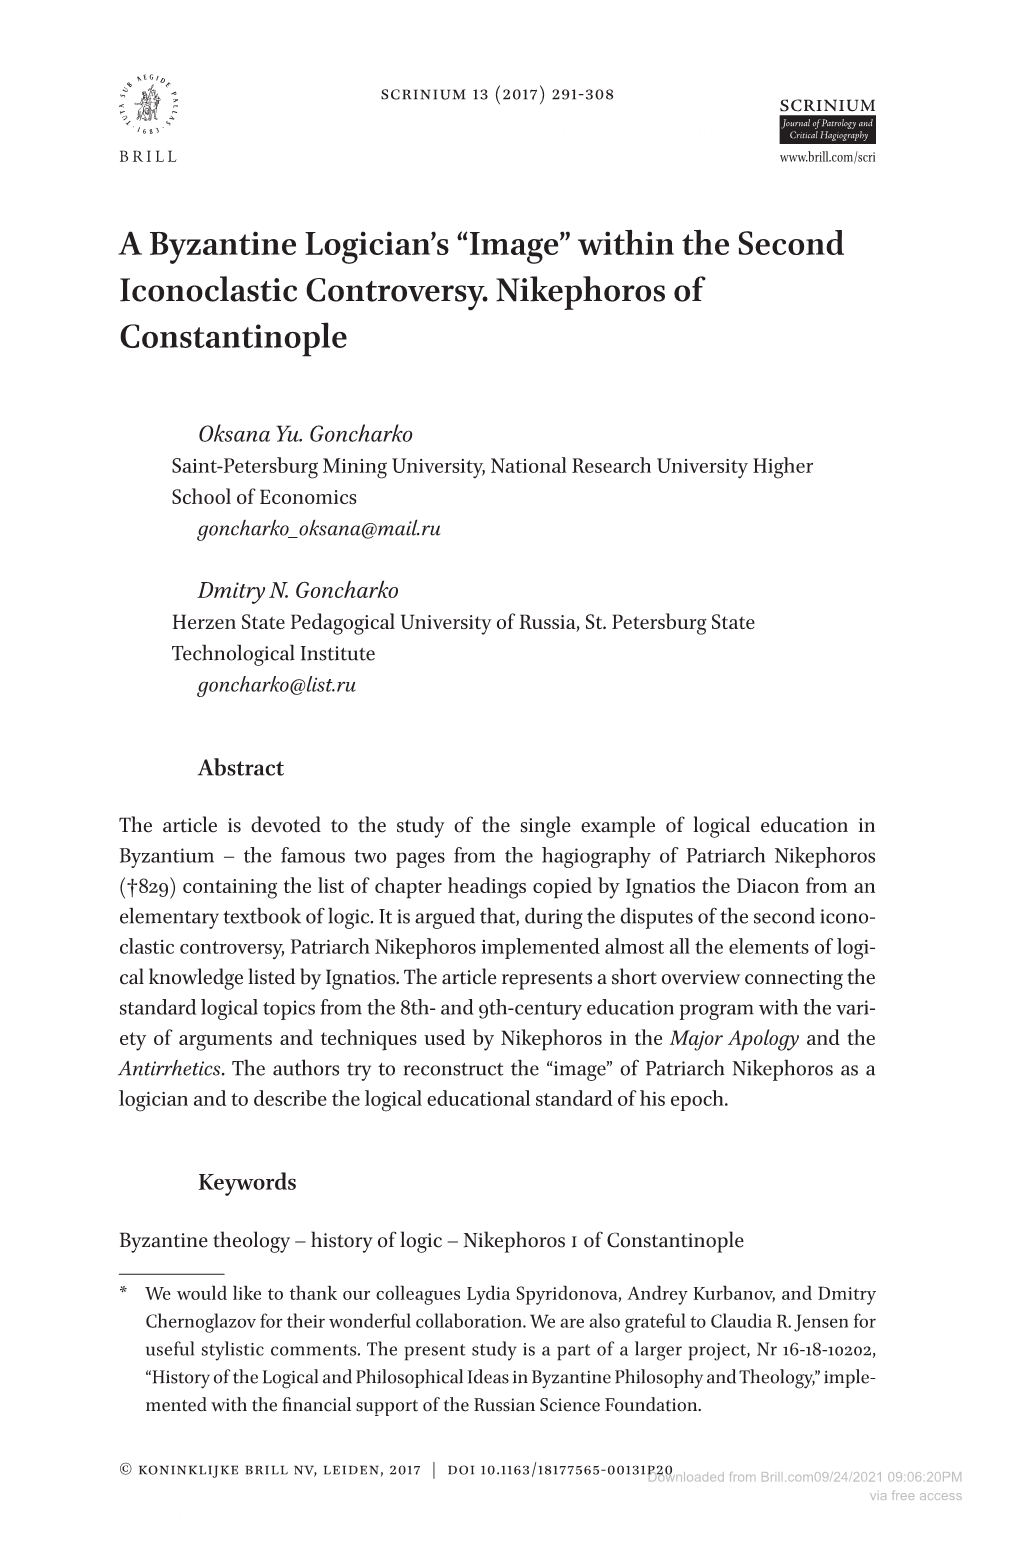 Within the Second Iconoclastic Controversy. Nikephoros of Constantinople